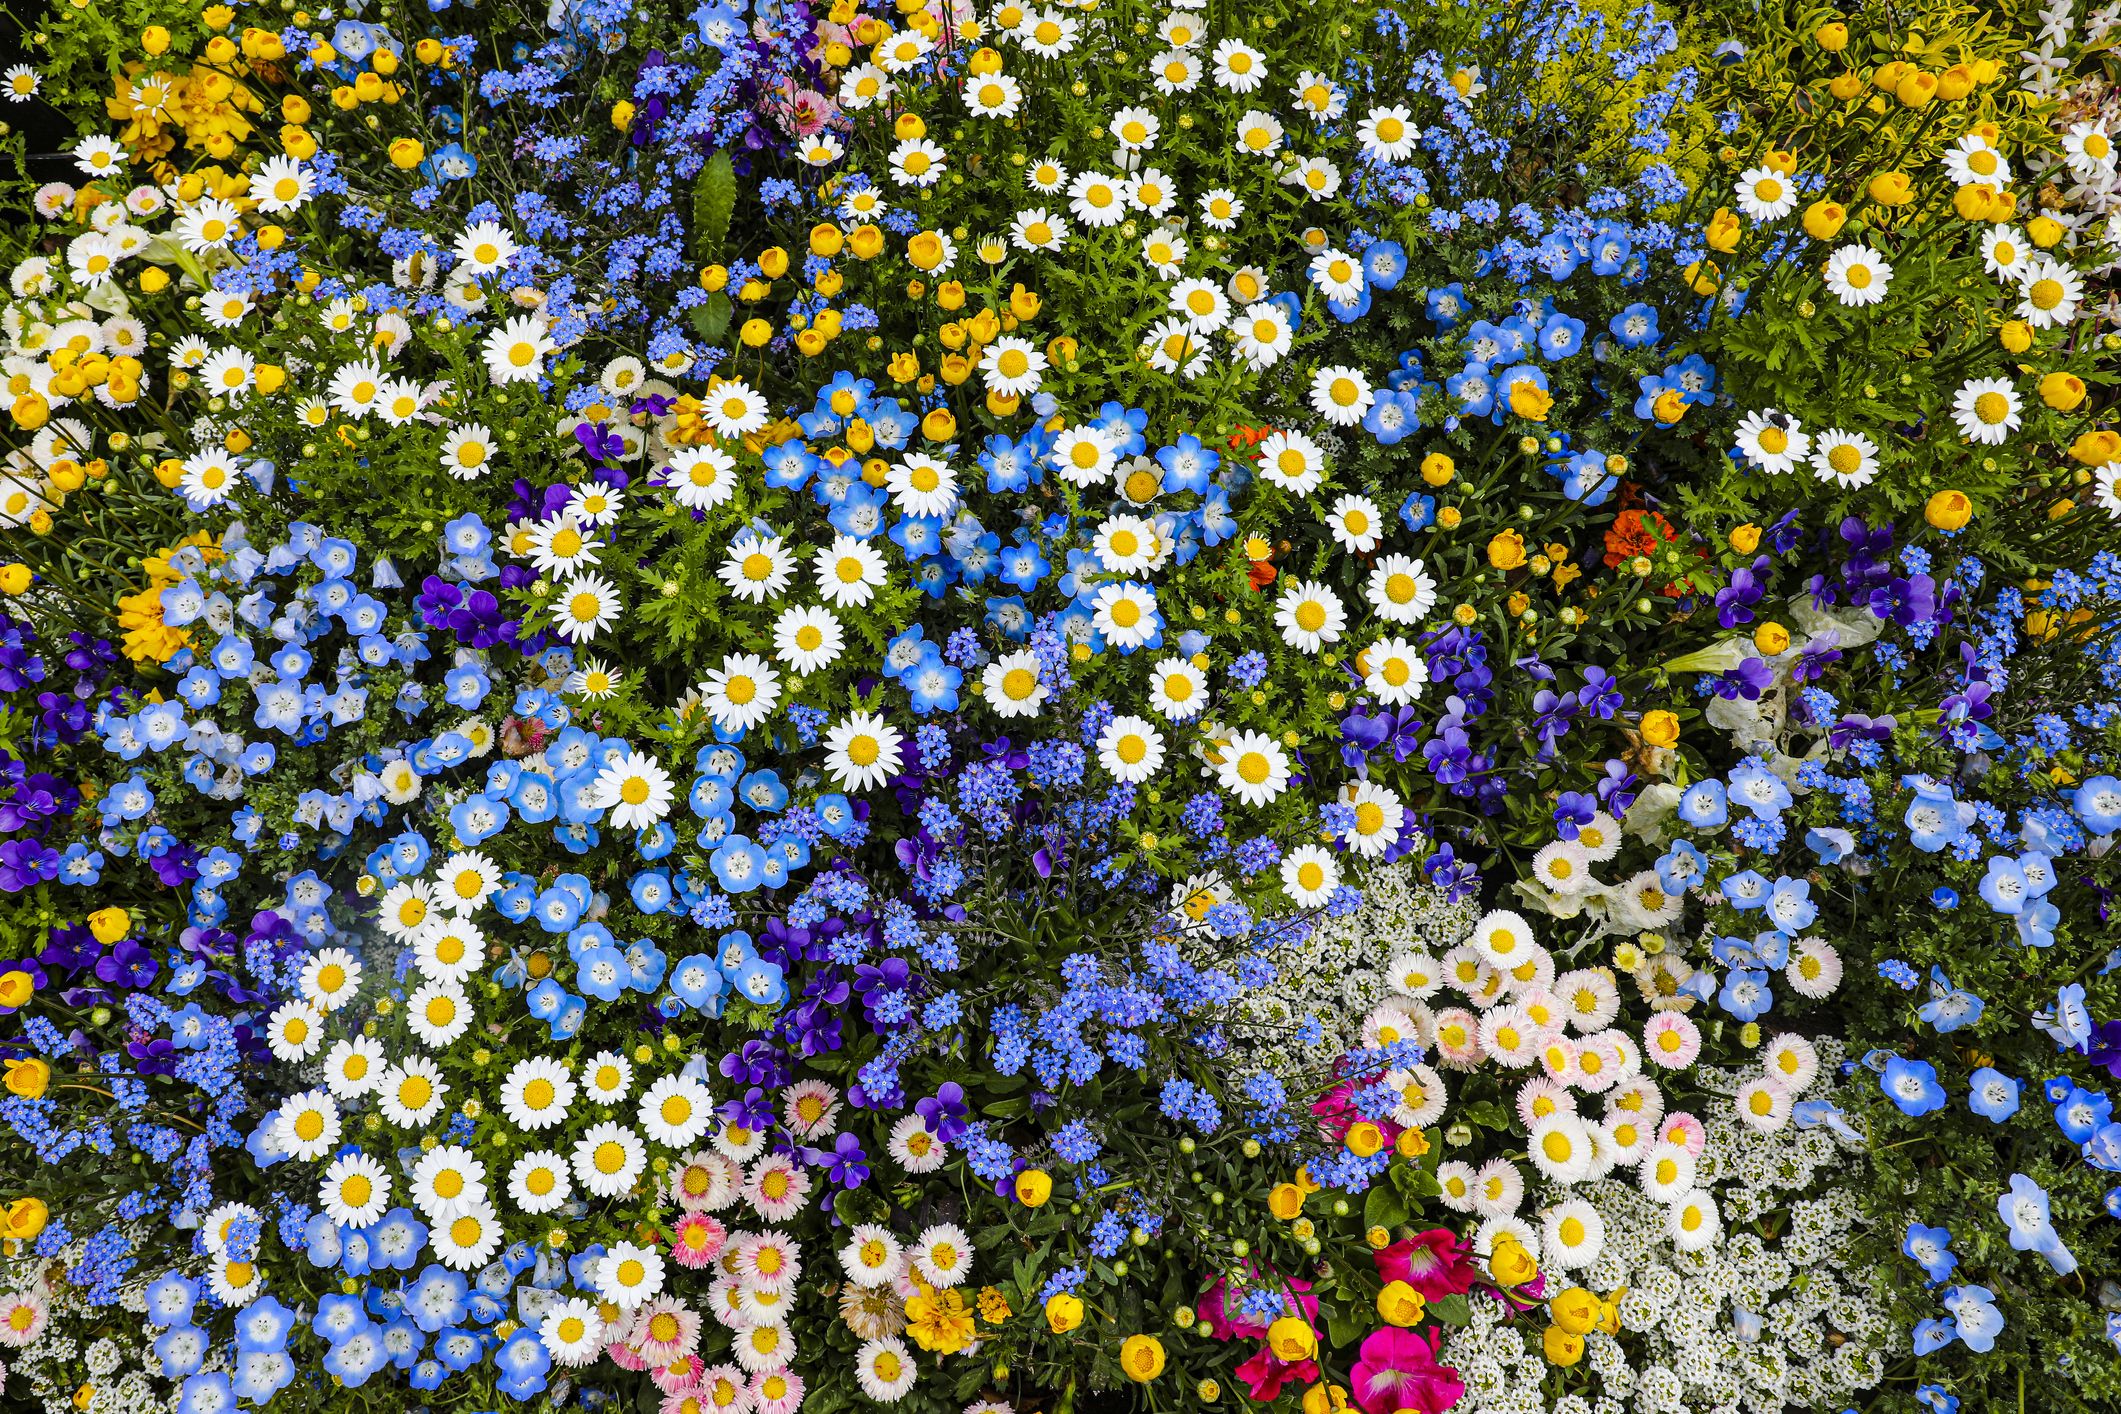 18 Annual Flowers and Plants for a Colorful Garden, Per Experts